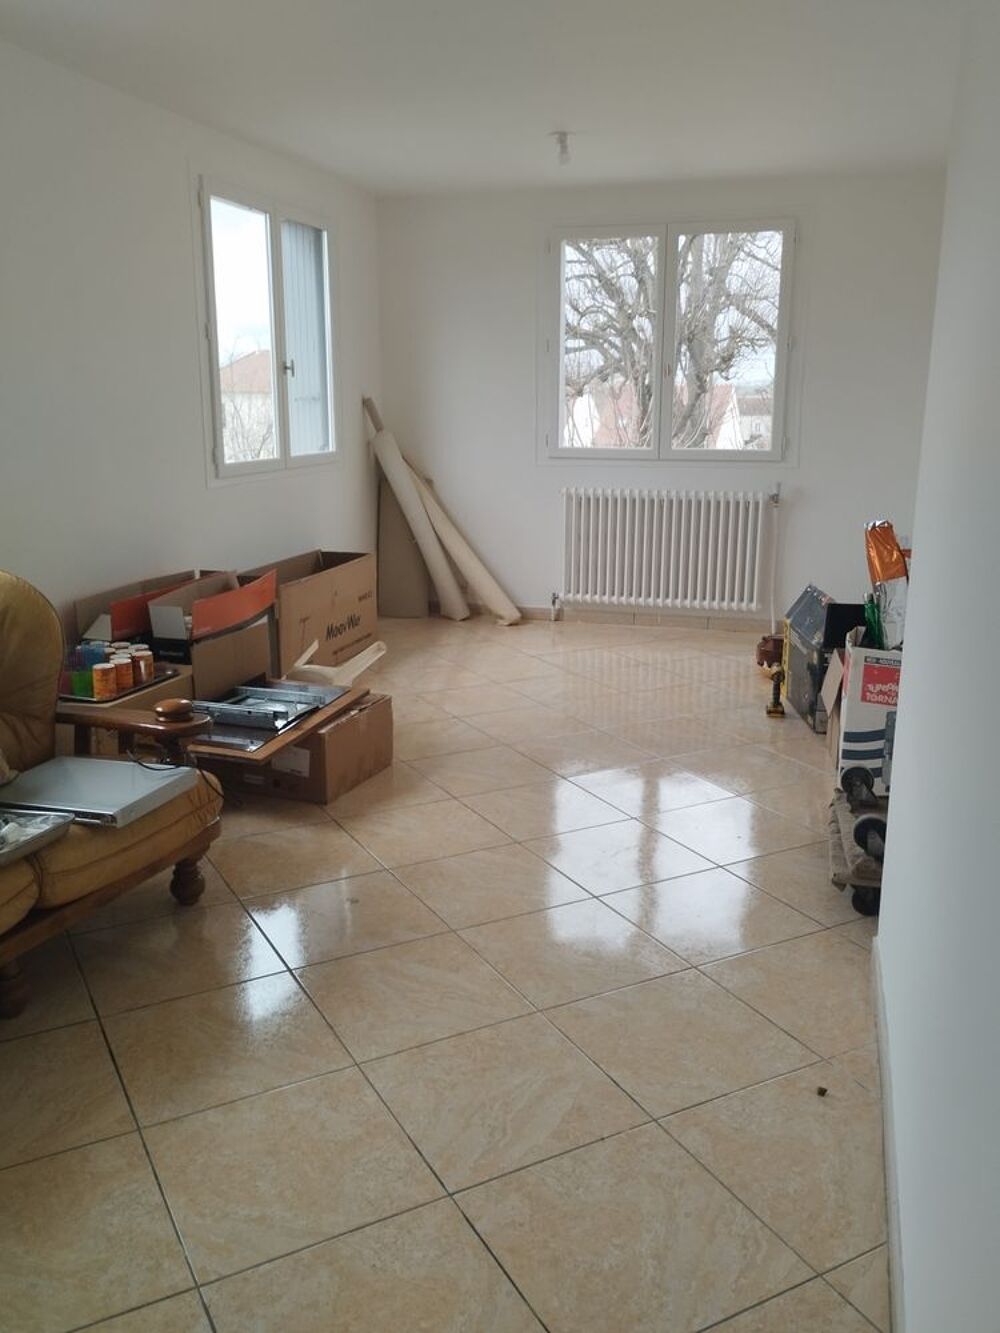 Location Appartement Appartement F4 93 m2 hab loyer 1300maincy77950 Maincy